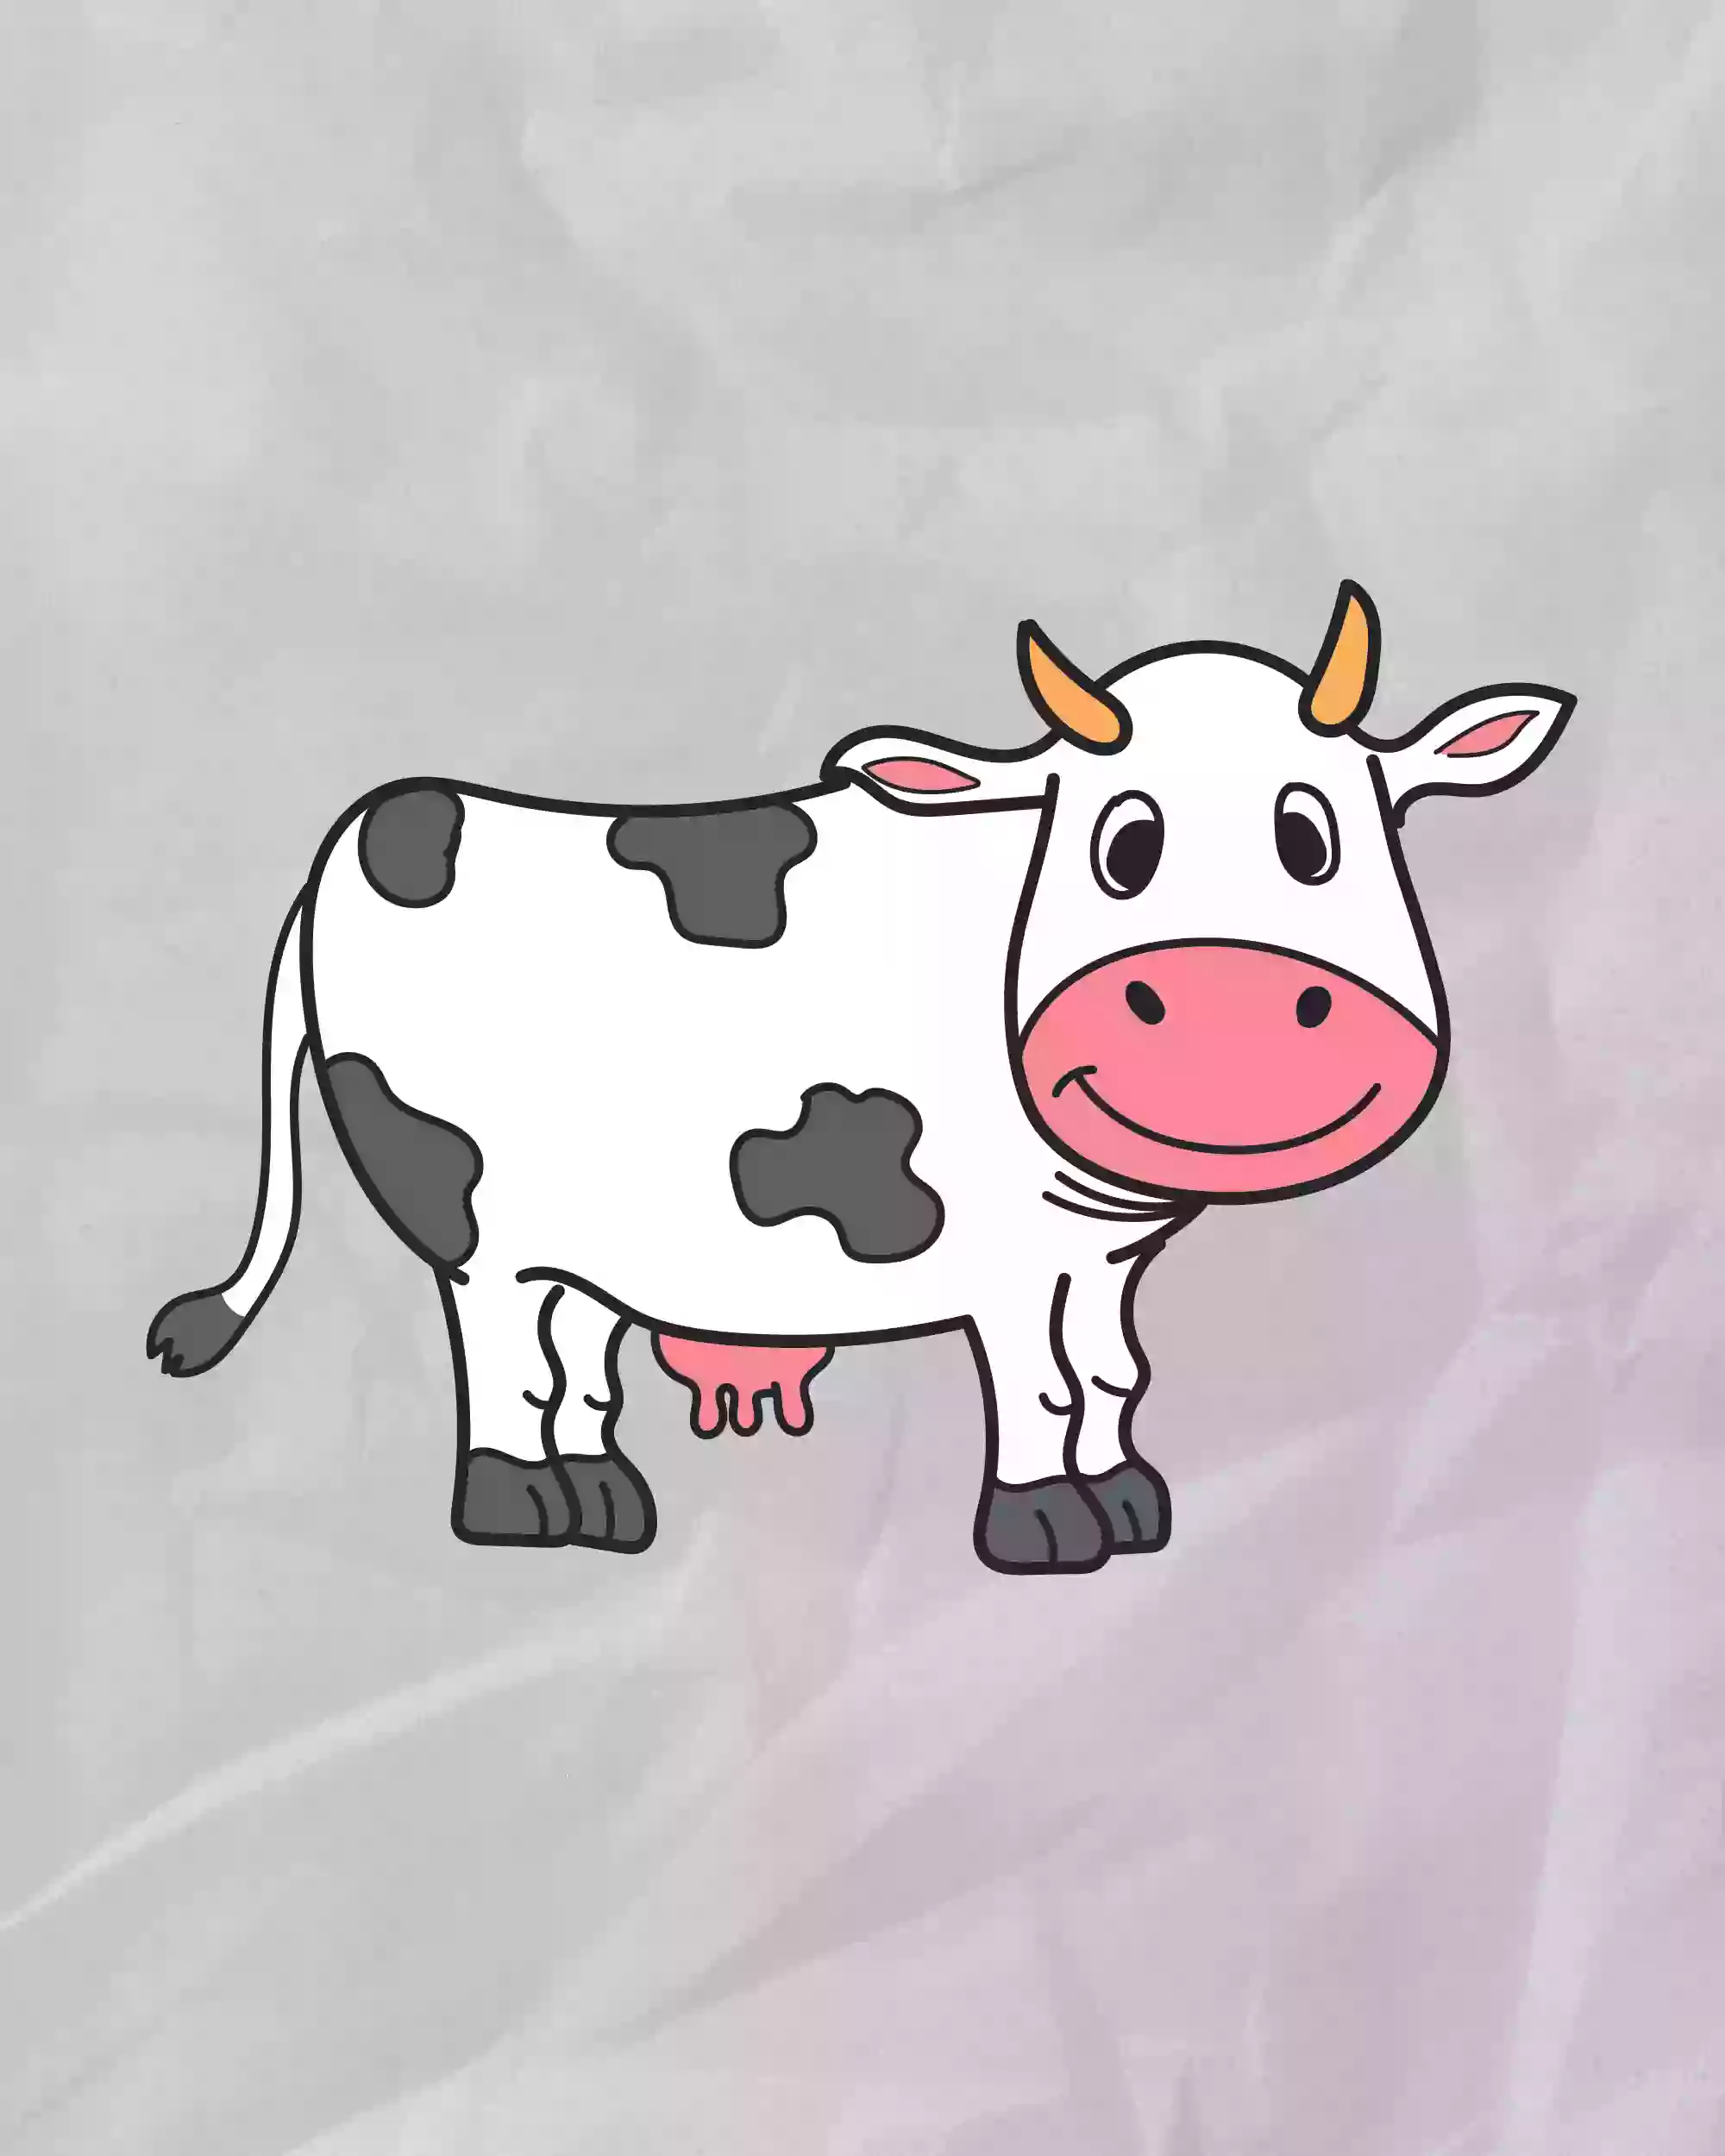 How TO Draw a cow step by step easy/draw a cow/cow drawing - YouTube